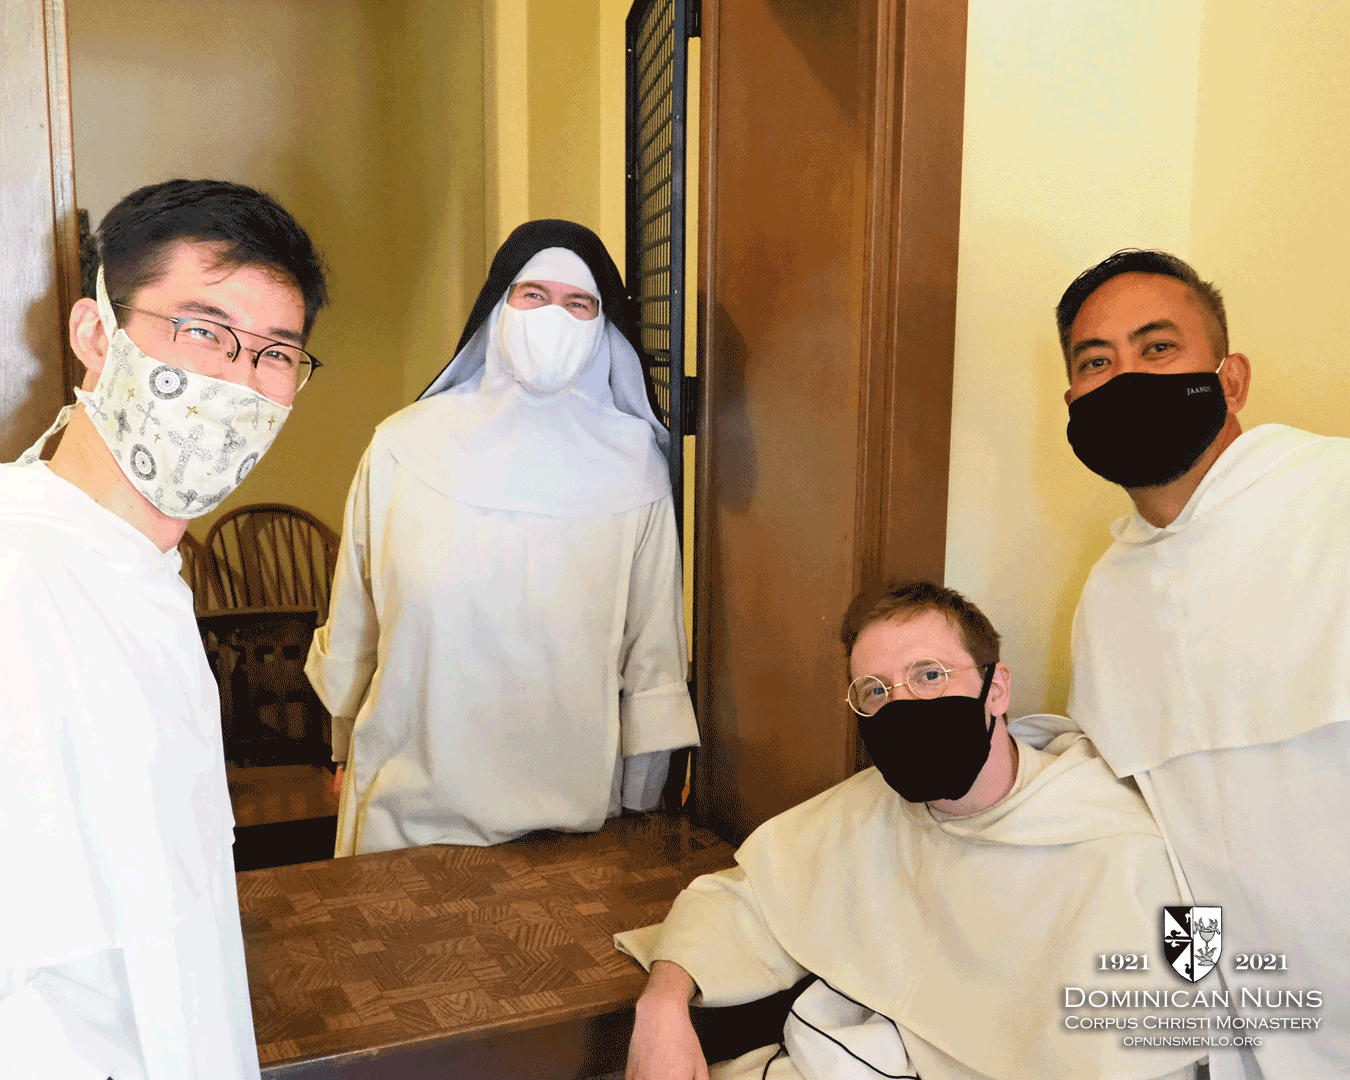  It was so good to visit with our Dominican family, even with the masks (can you speak up…and who are you?  :-)  Photo by Br. David Woo, O.P., courtesy of the Western Dominican Province. 